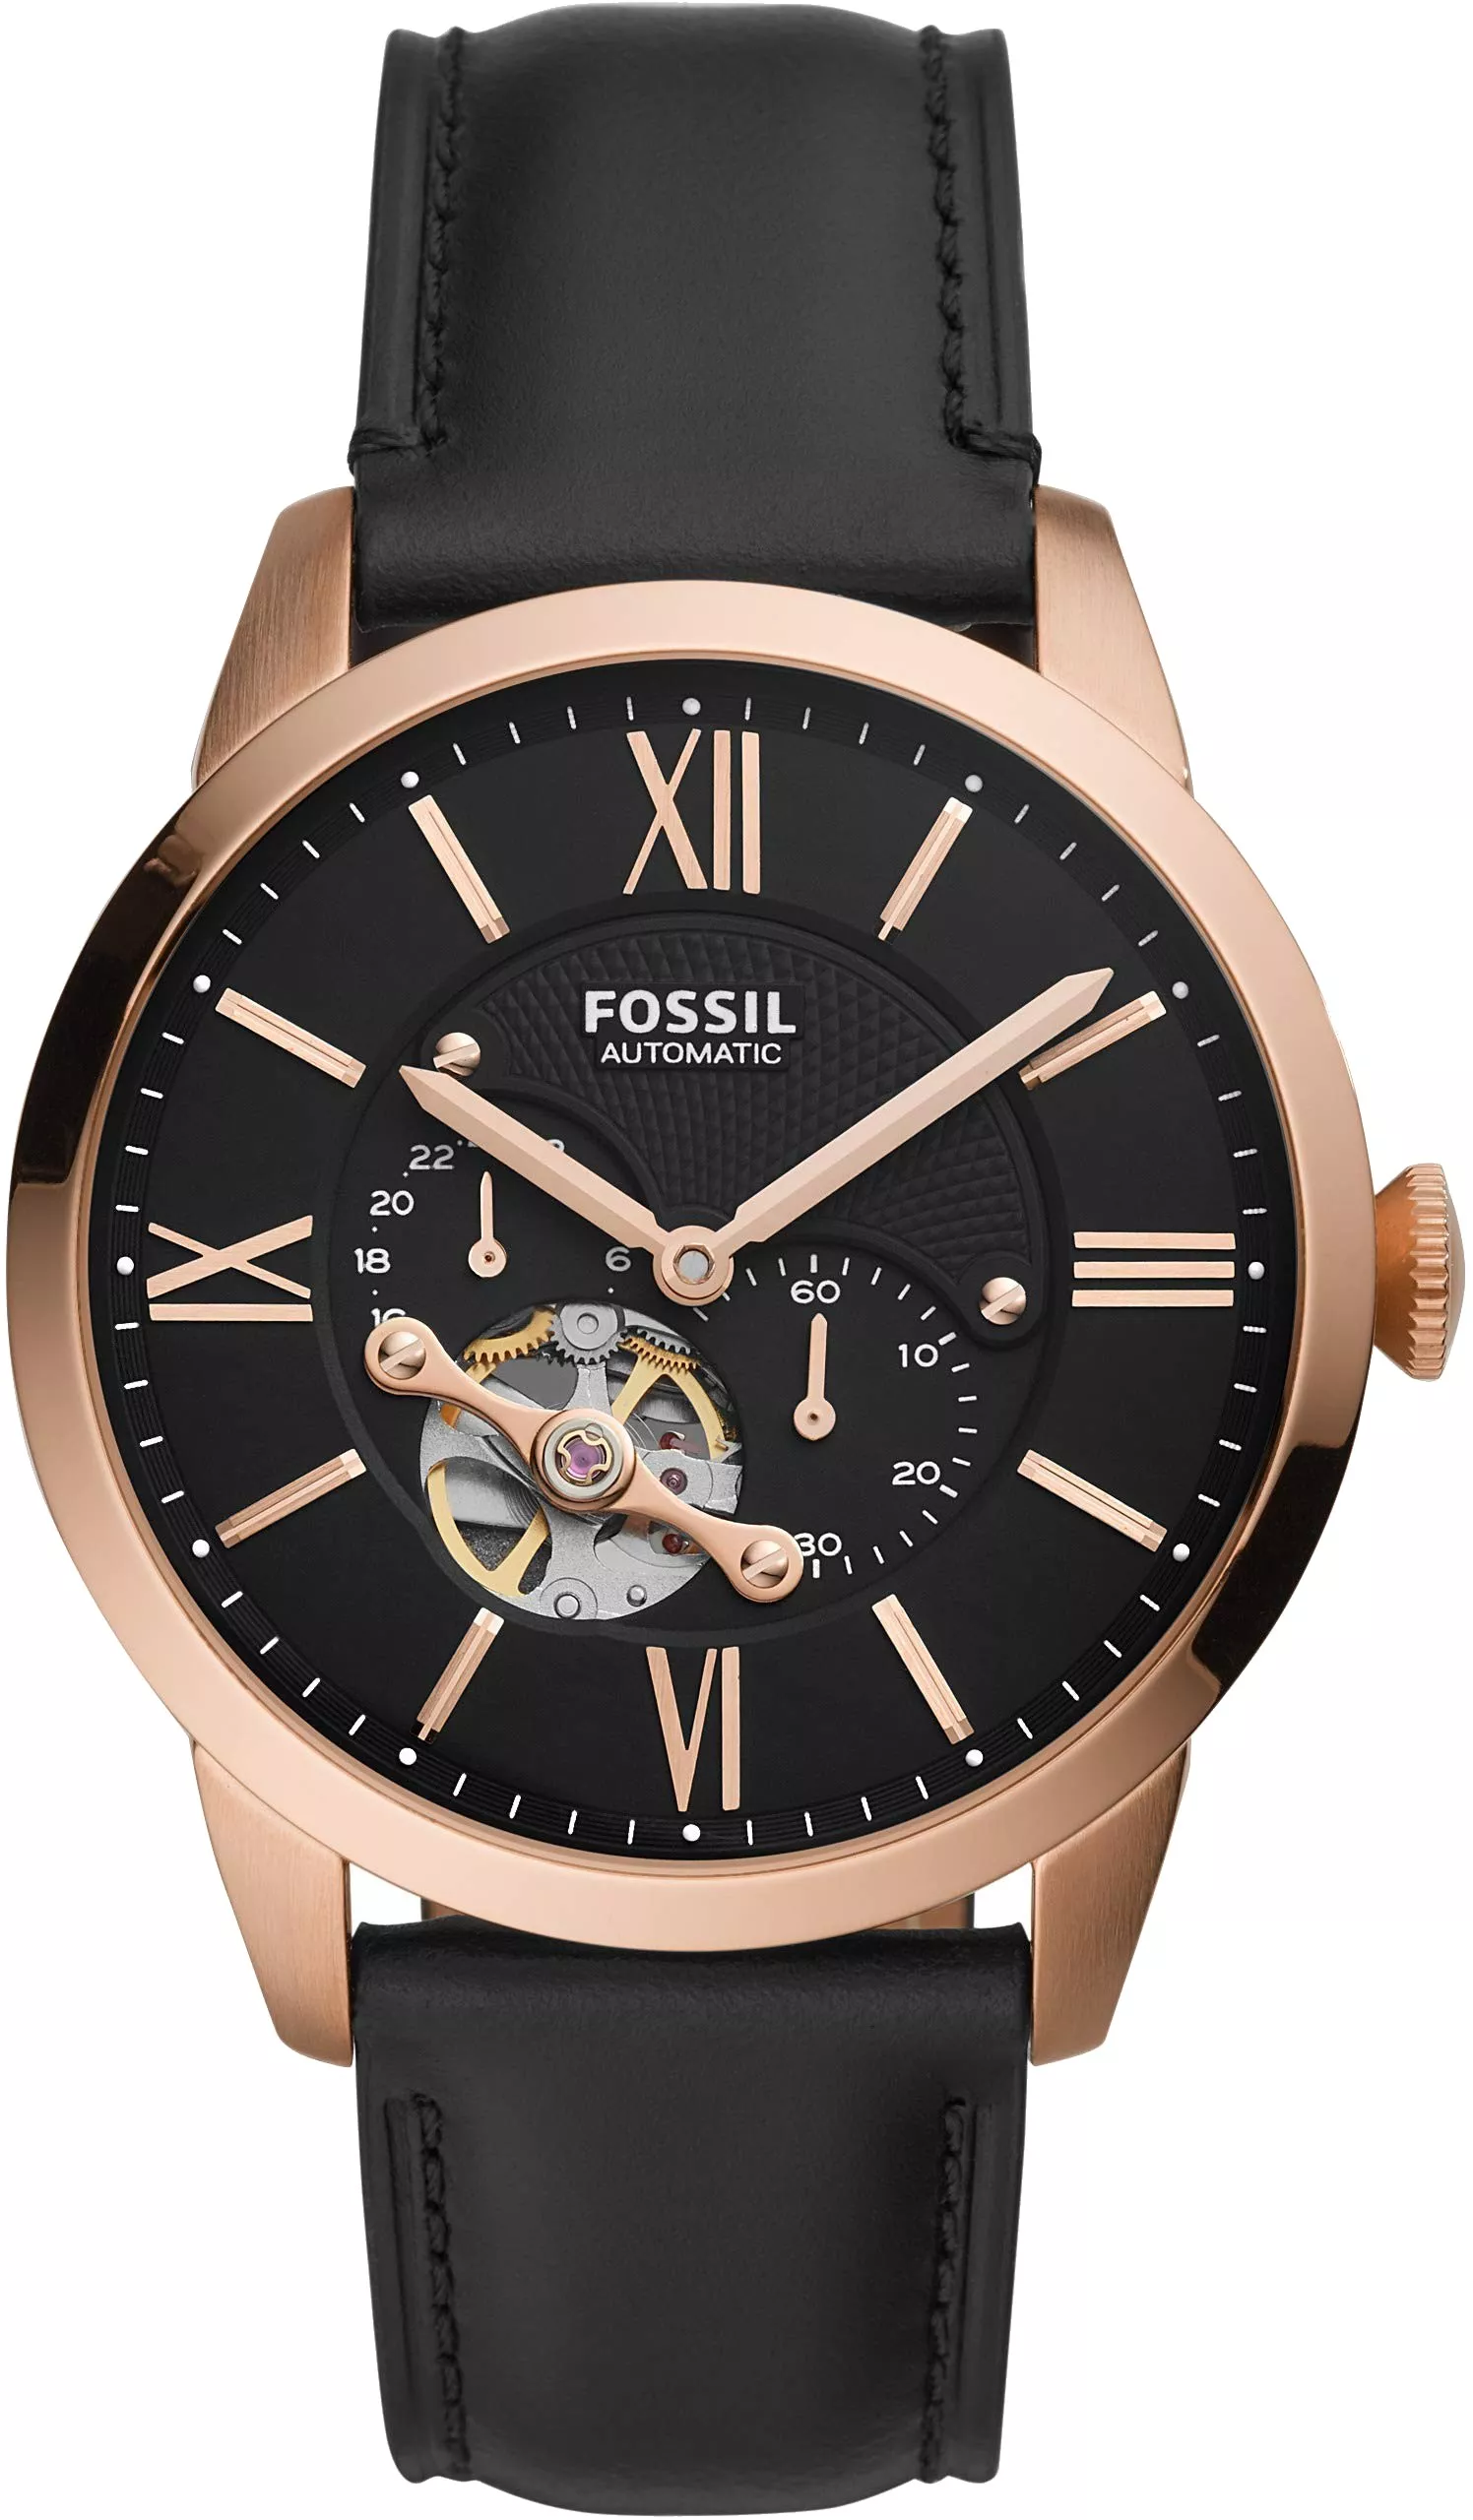 MSP: 97994 Fossil Townsman Automatic Black Leather Watch 44MM 6,010,000